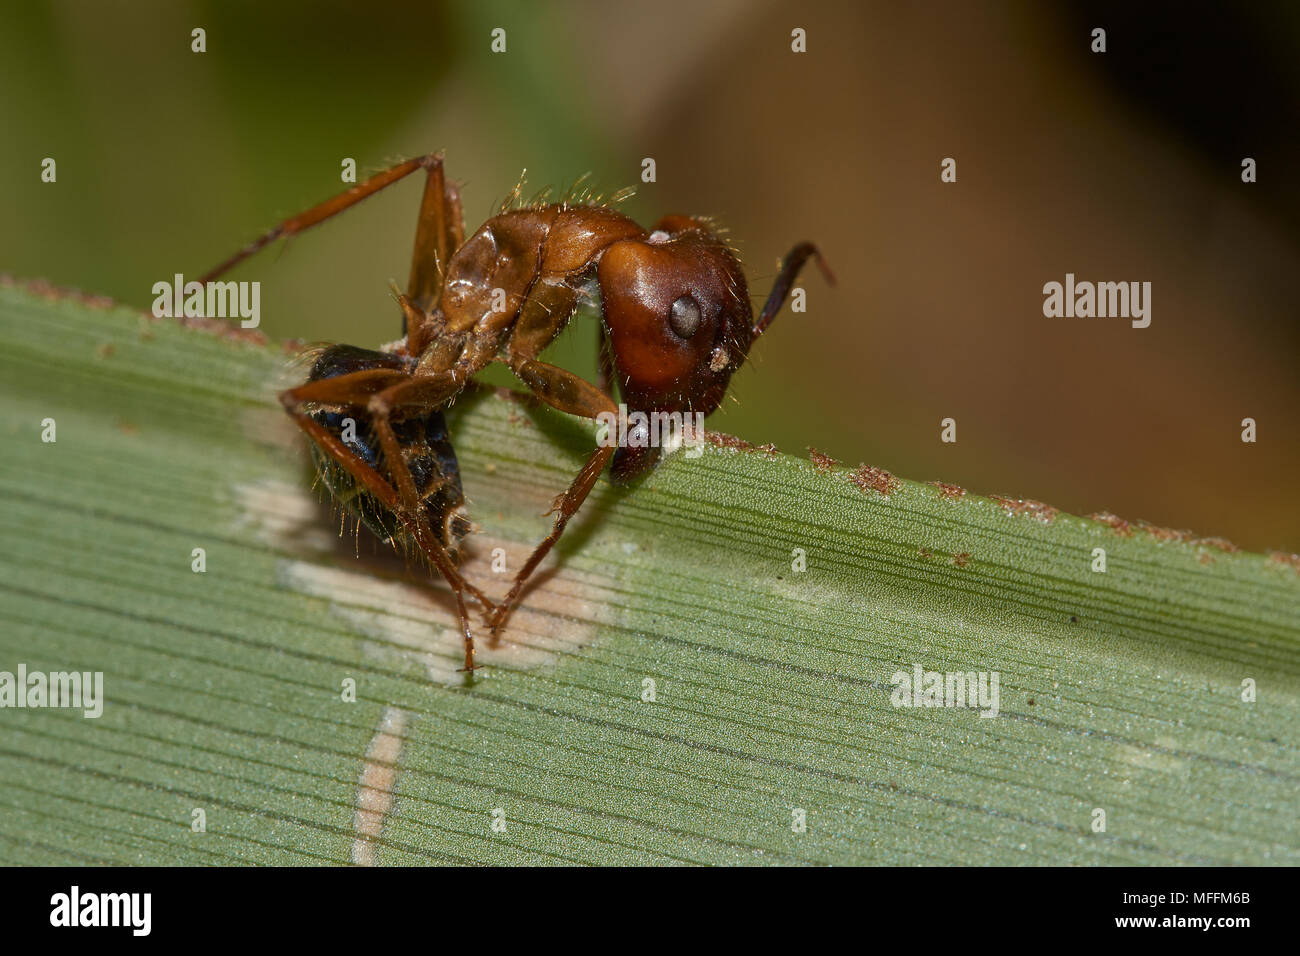 ANT infected by fungus - the fungus takes over the brain of the ant and changes the ant's behaviour 'instructing' it to grip onto the plant etc  Flori Stock Photo